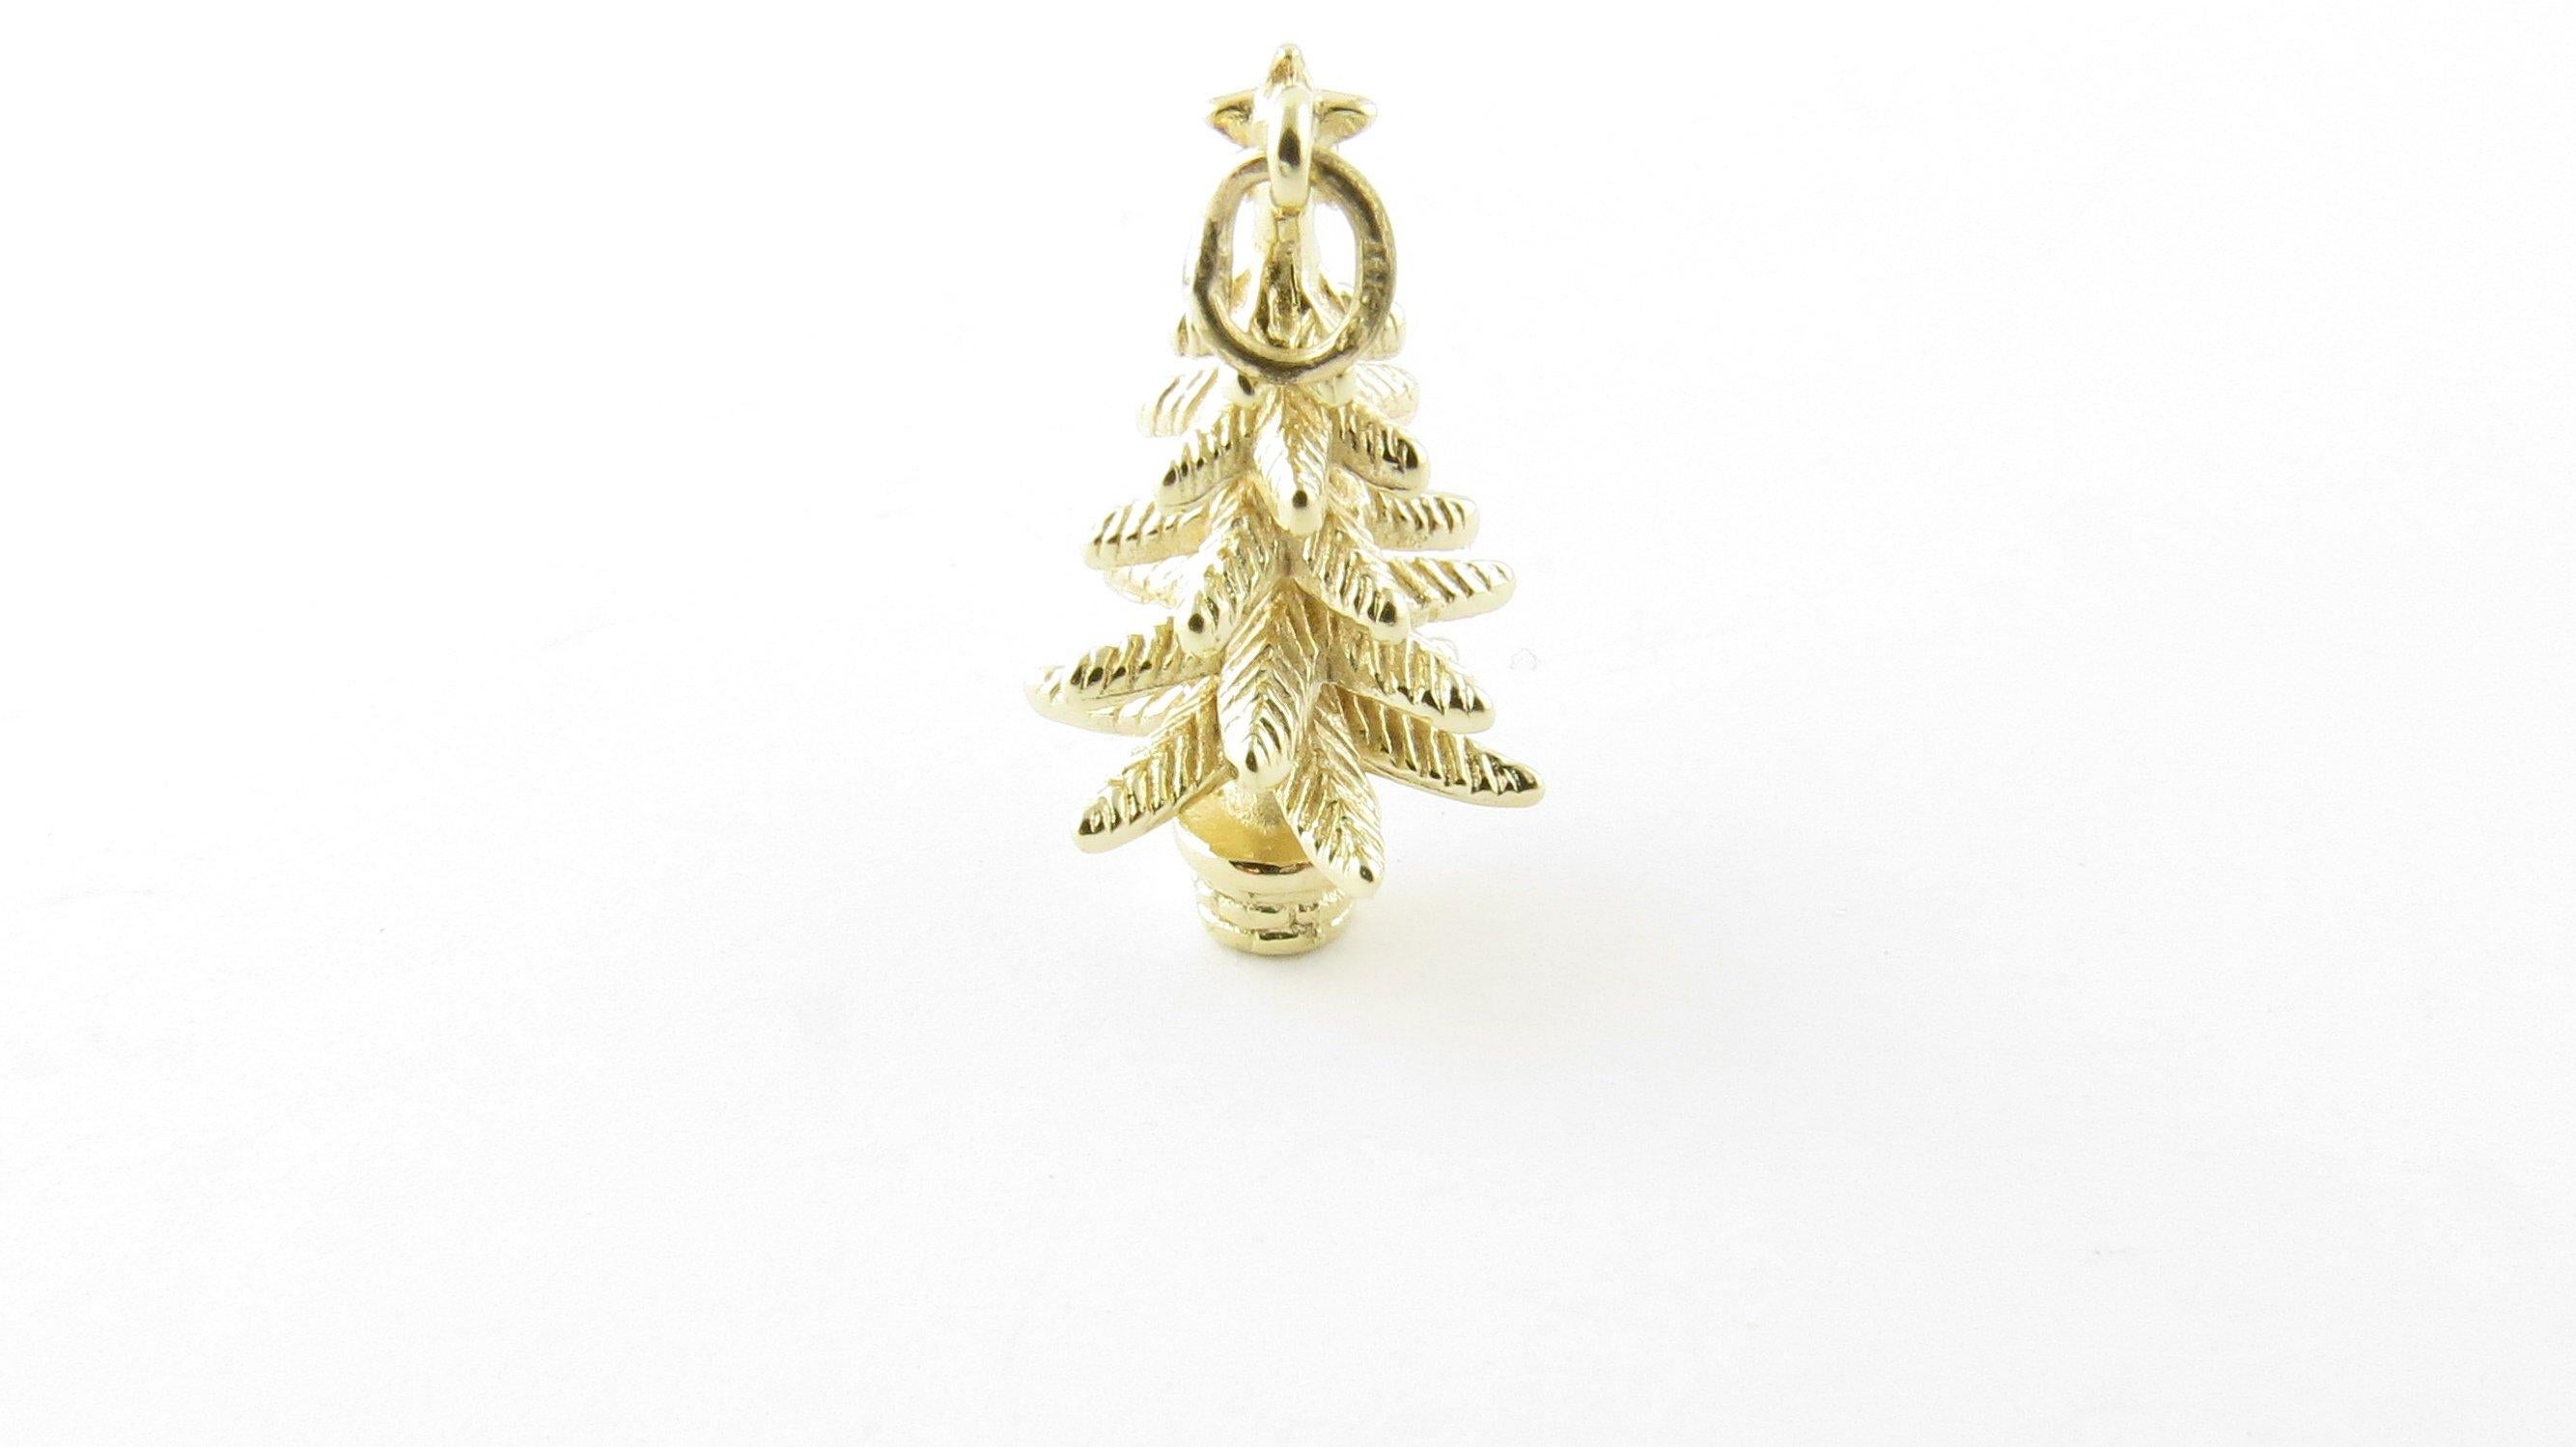 Vintage 14 Karat Yellow Gold Christmas Tree Charm- 'Tis the season! This lovely 3D charm features a miniature holiday tree meticulously detailed in 14K gold. Size: 22 mm x 12 mm (including loops) Weight: 1.9 dwt. / 3.1 gr. Acid tested for 14K gold.